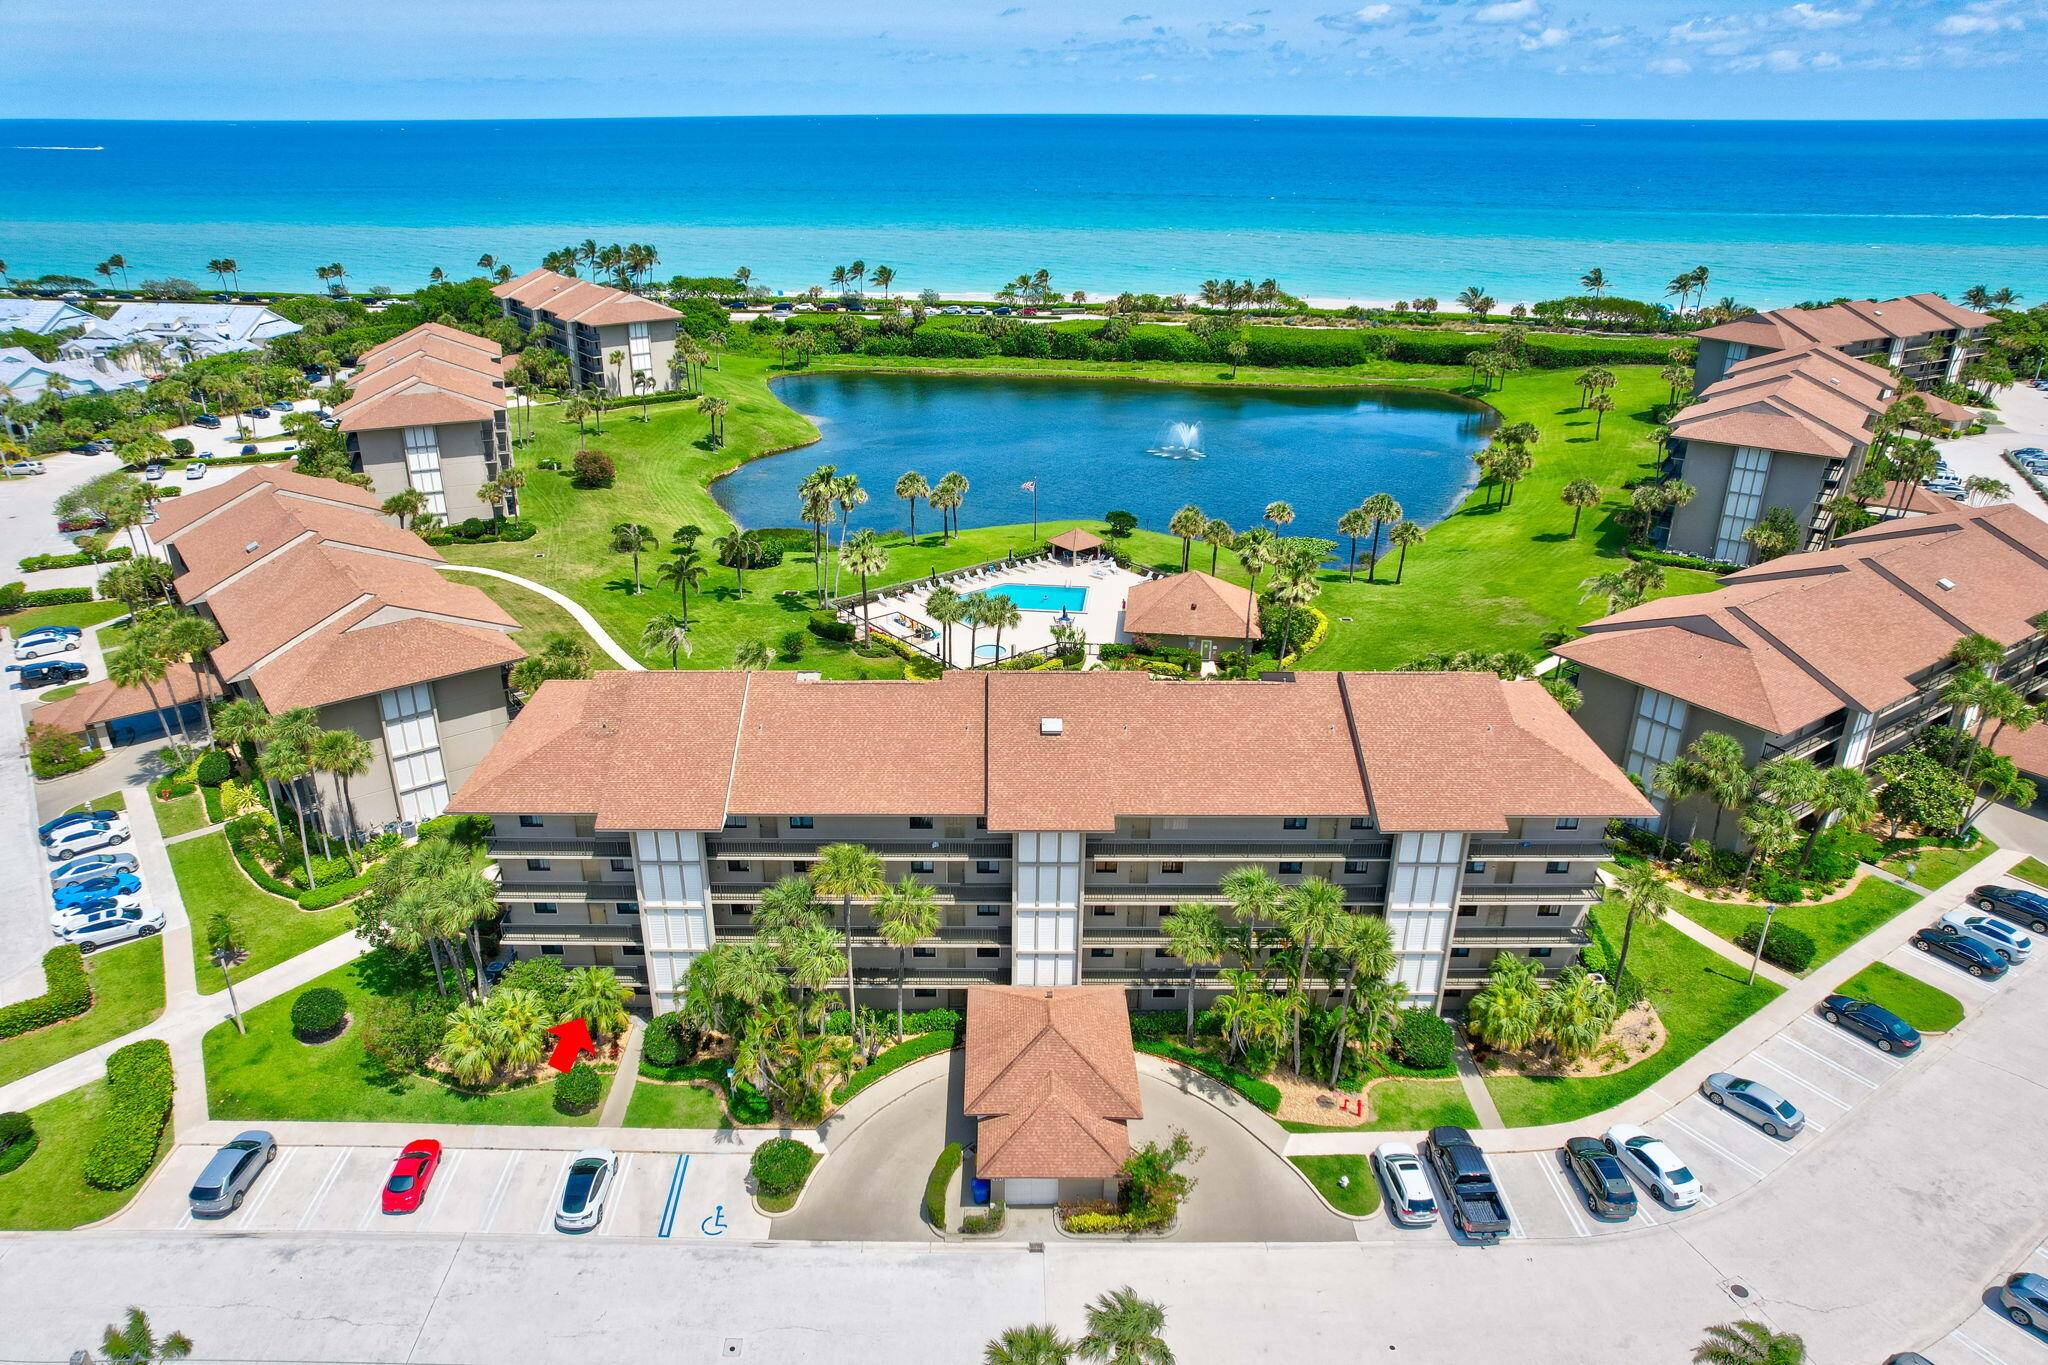 East facing corner unit only steps to the turquoise ocean and white sand beaches.